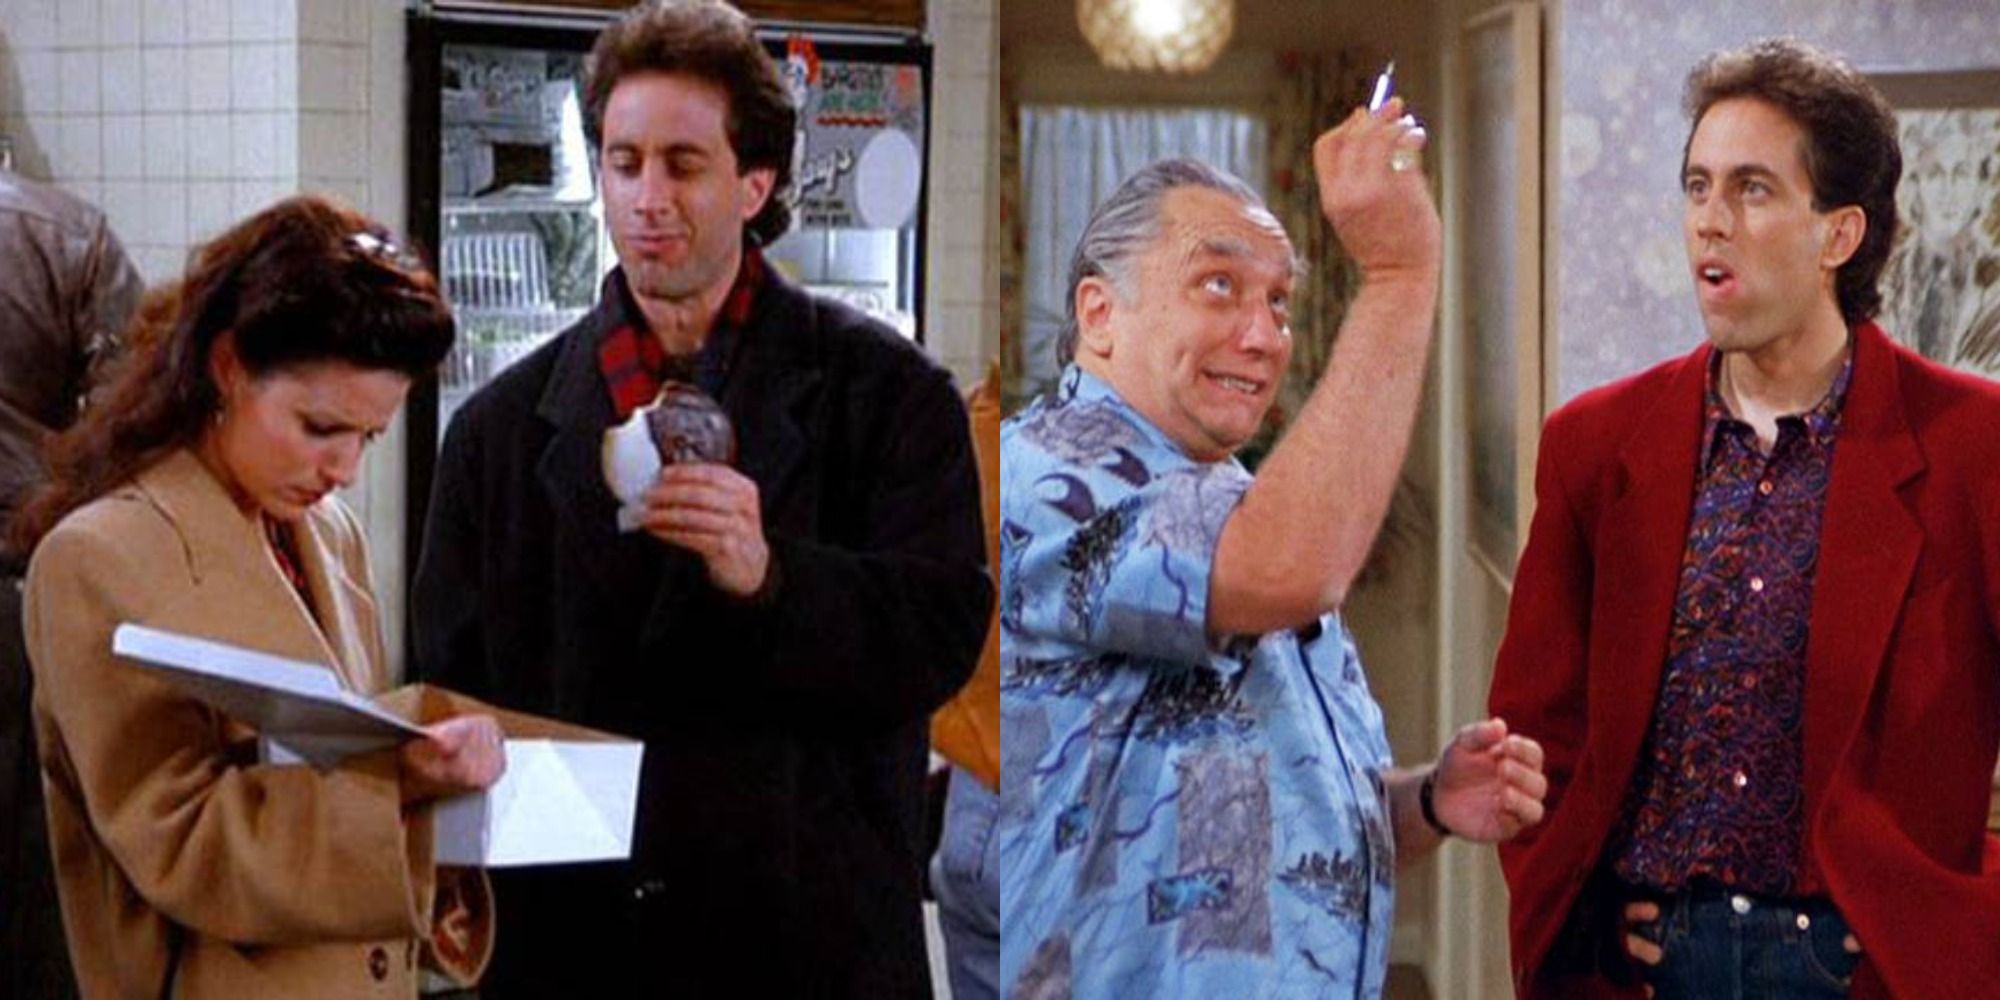 Split image showing Elaine and Jerry at the bakery, and Jack Klompus and Jerry looking at the pen